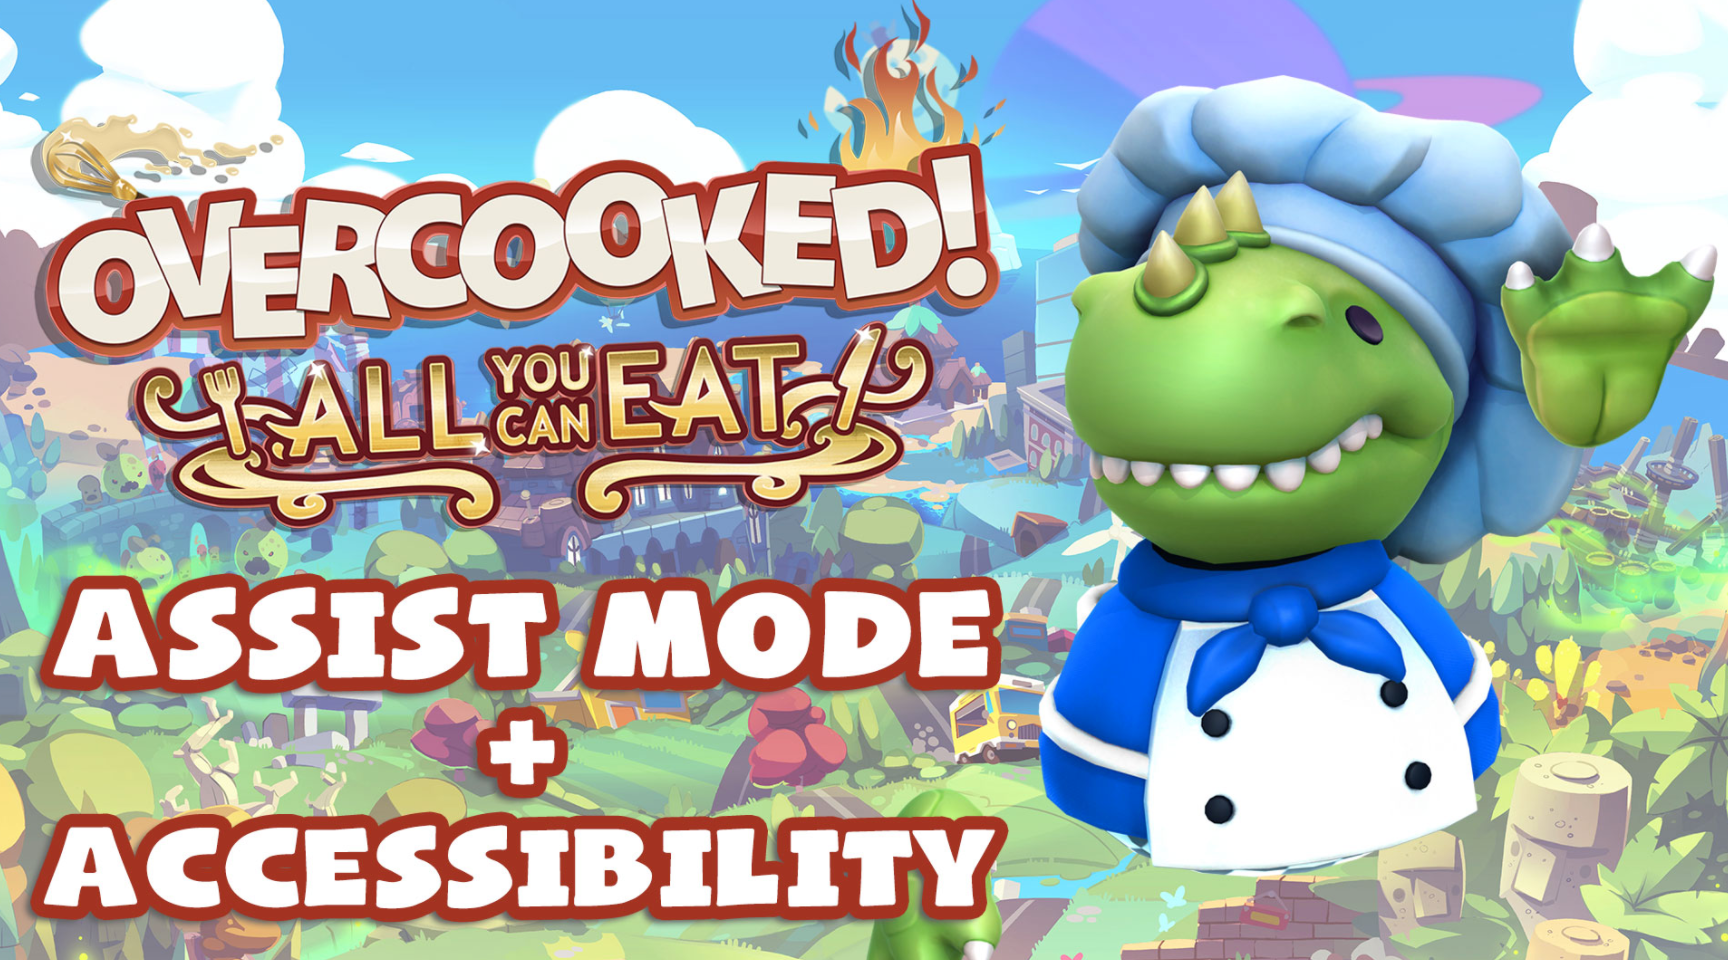 Overcooked Accessibility